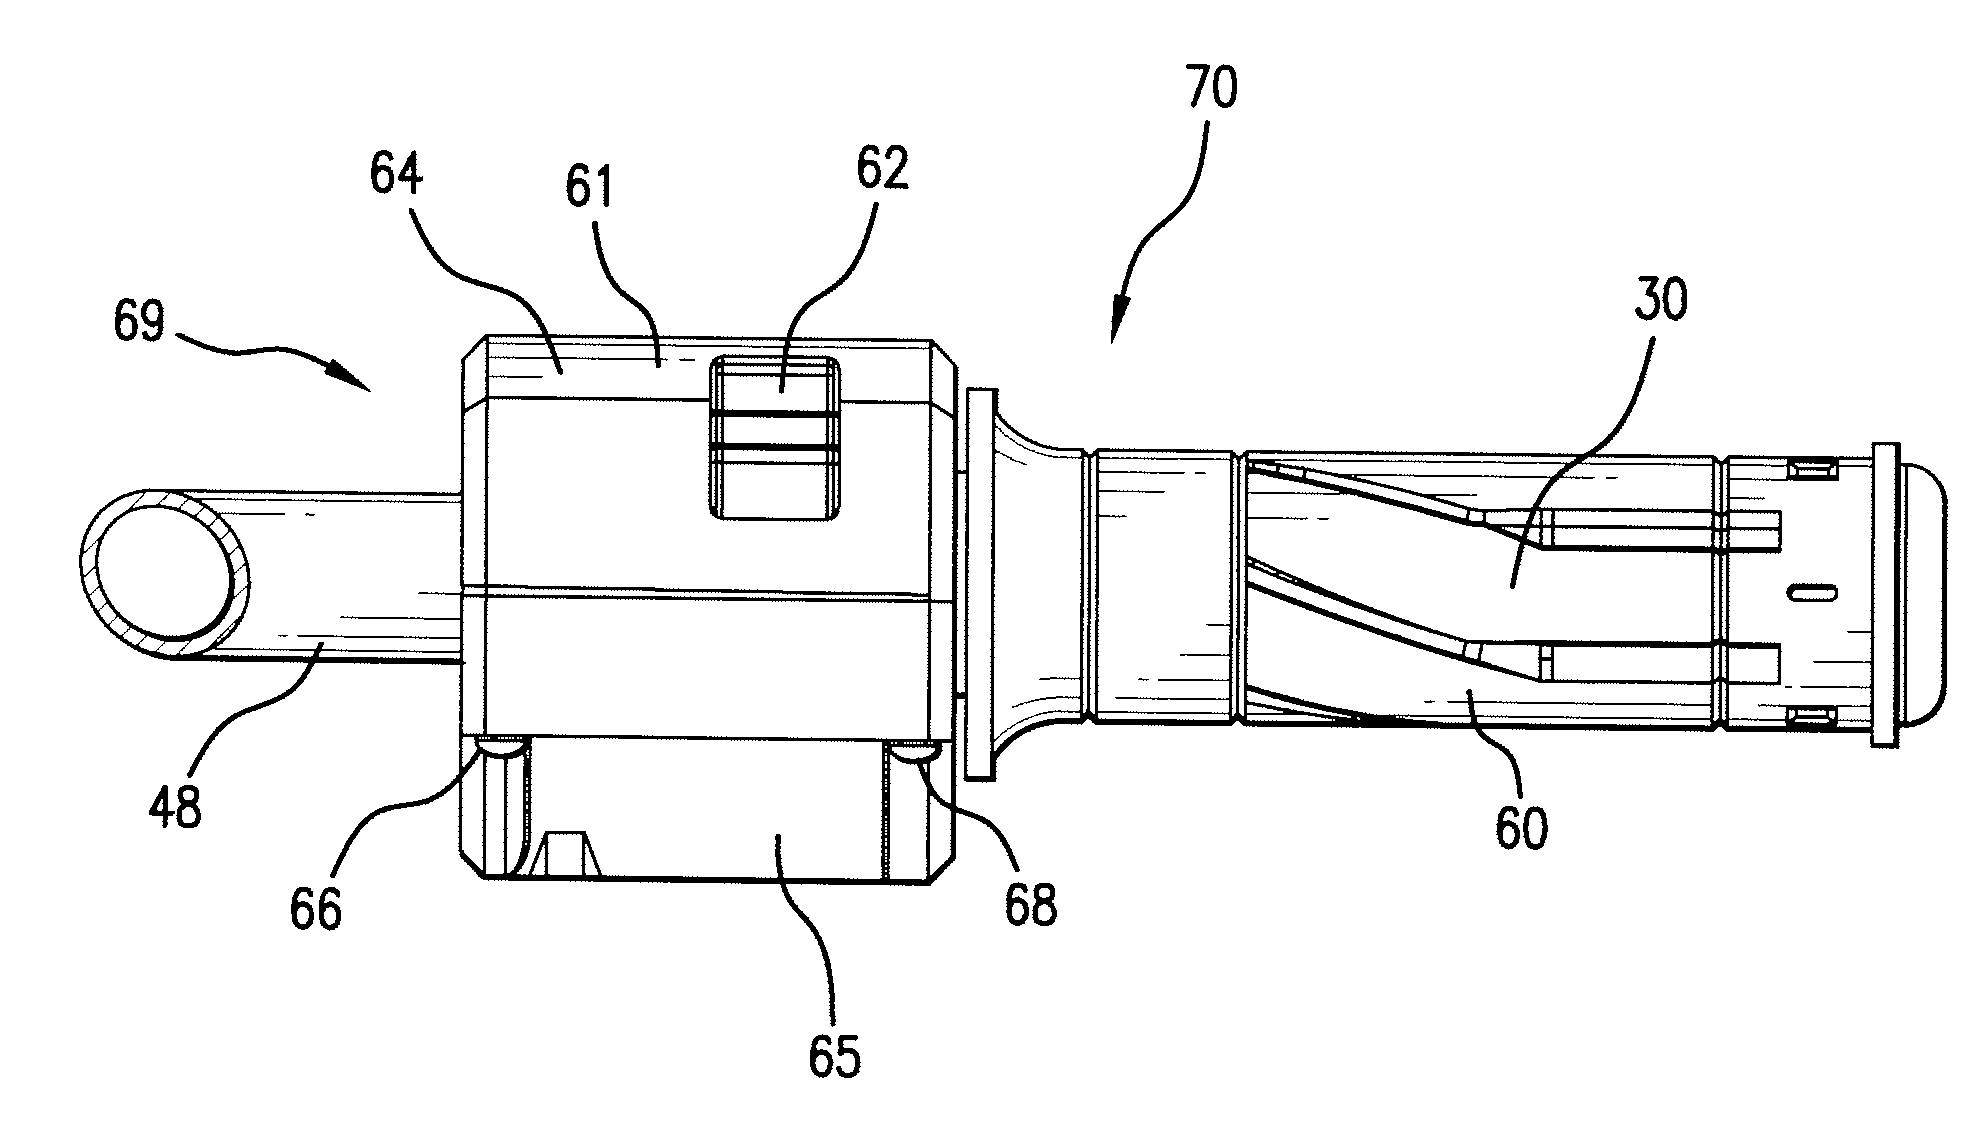 Vehicle with contactless throttle control